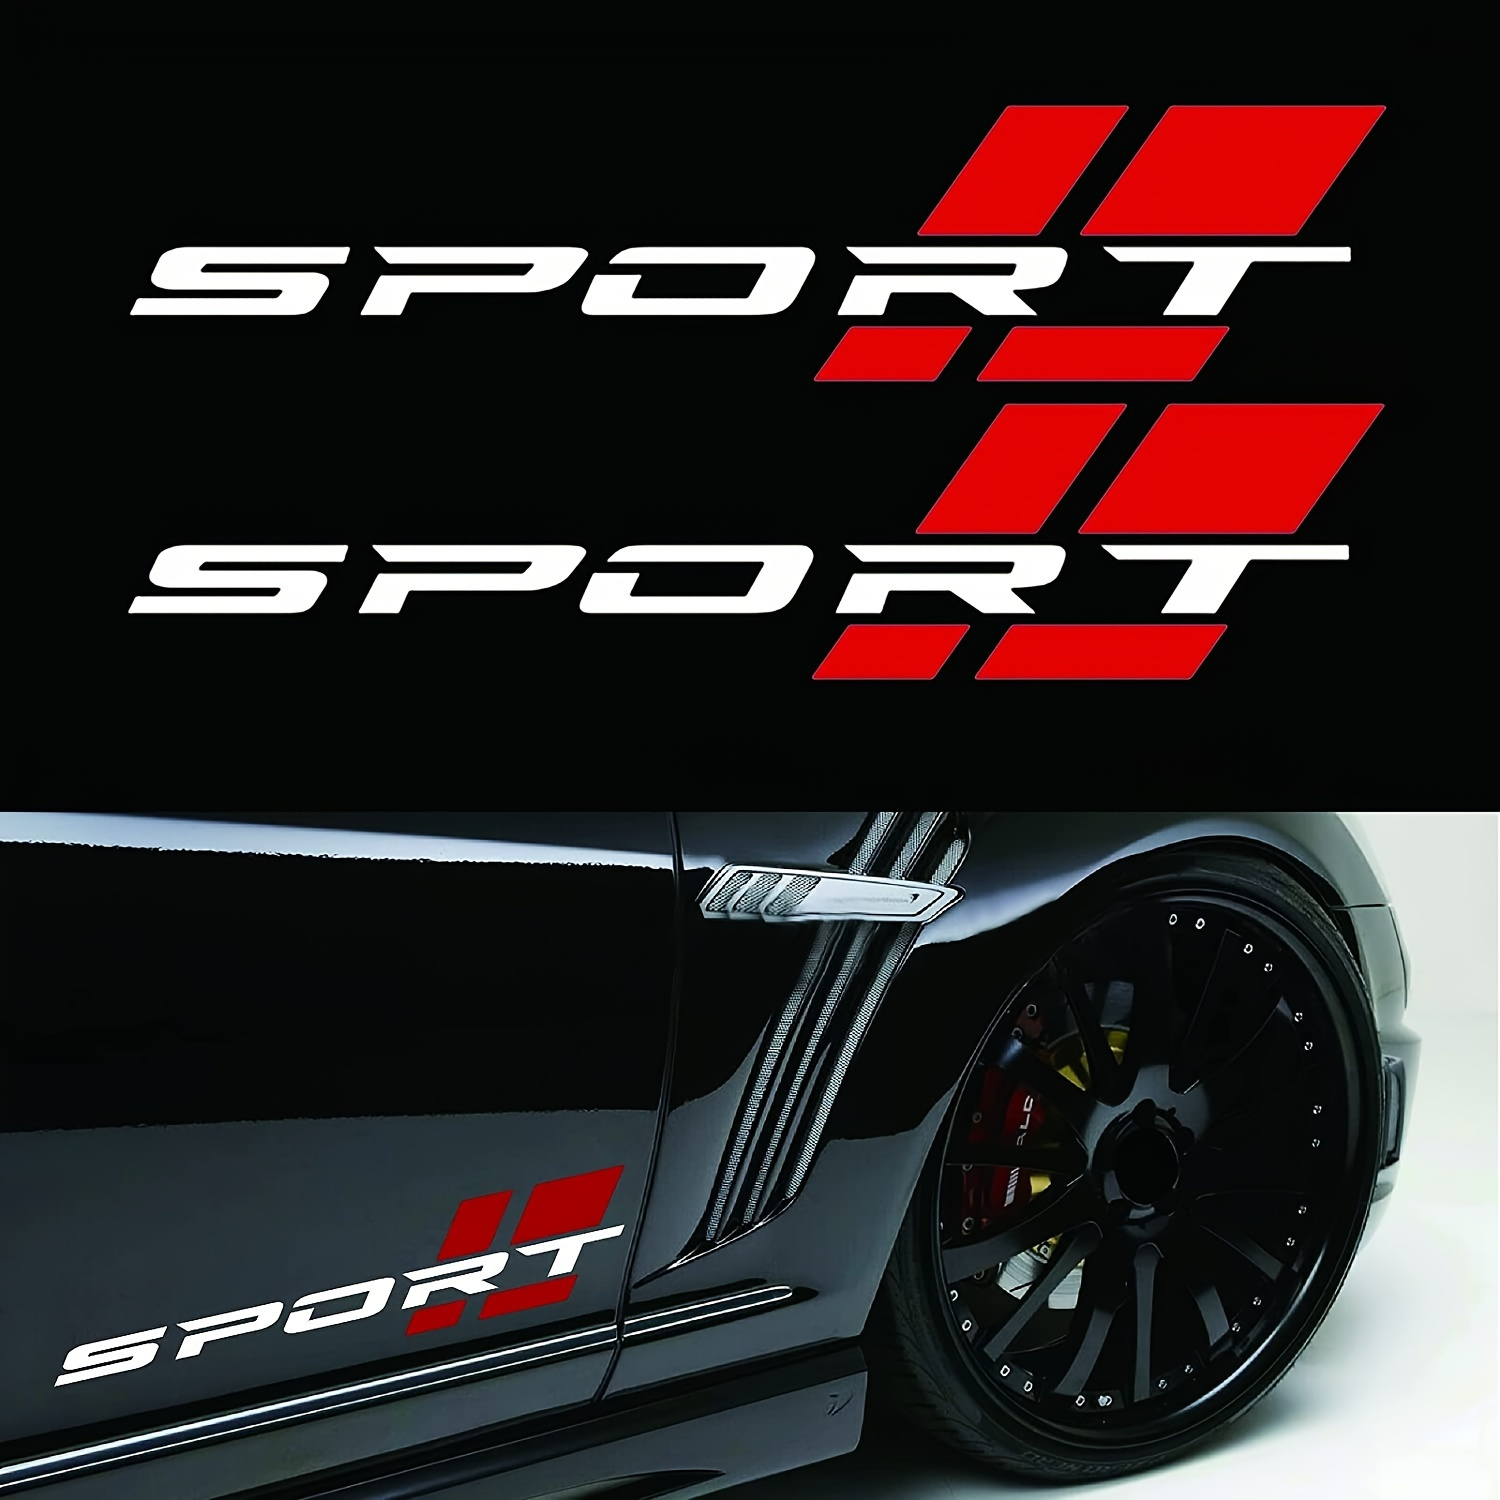 

15in Sport Emblem Car Decals - Add Style To Your Vehicle With These Rear Trunk Badge Decals!